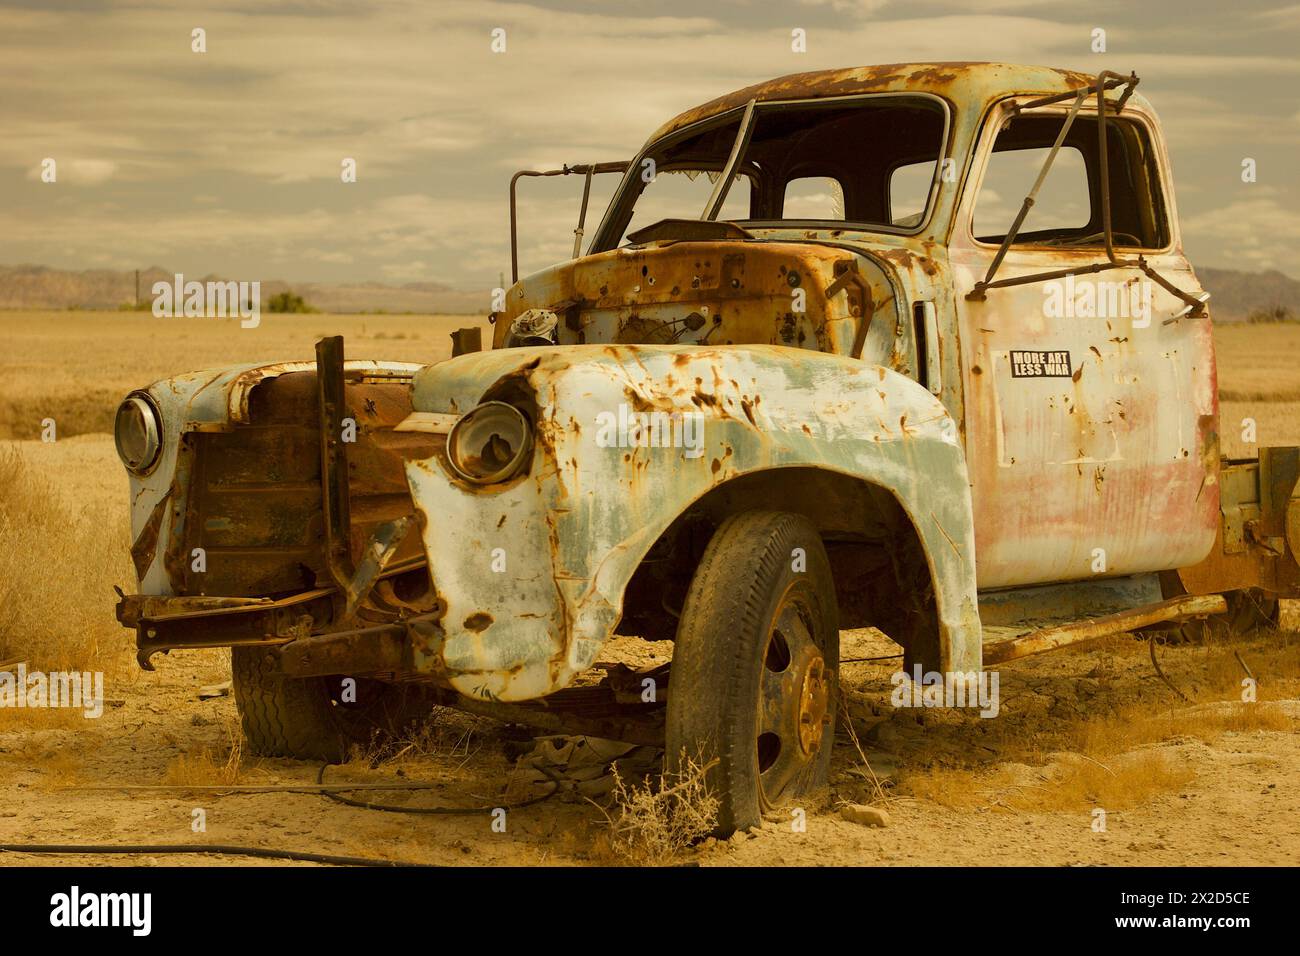 Close on an antique Chevy pickup truck, sun-scorched and abandoned, left sinking into the desert soil. Stock Photo